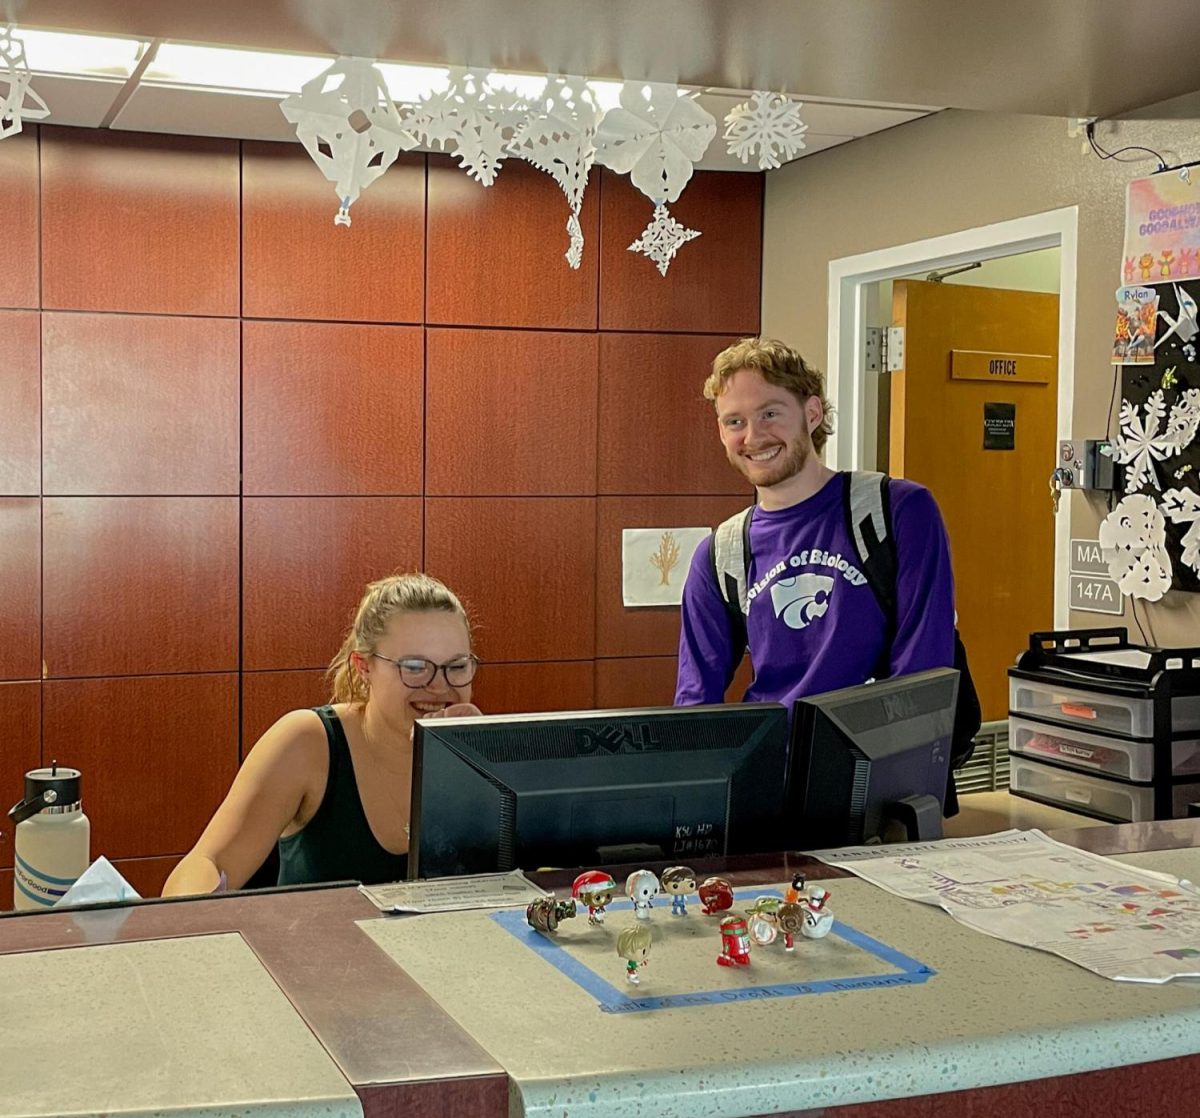 While+working+at+the+front+desk+of+Goodnow+Hall%2C+two+Resident+Assistants+converse.+Goodnow+Hall+is+one+dorm+option+for+on-campus+living.